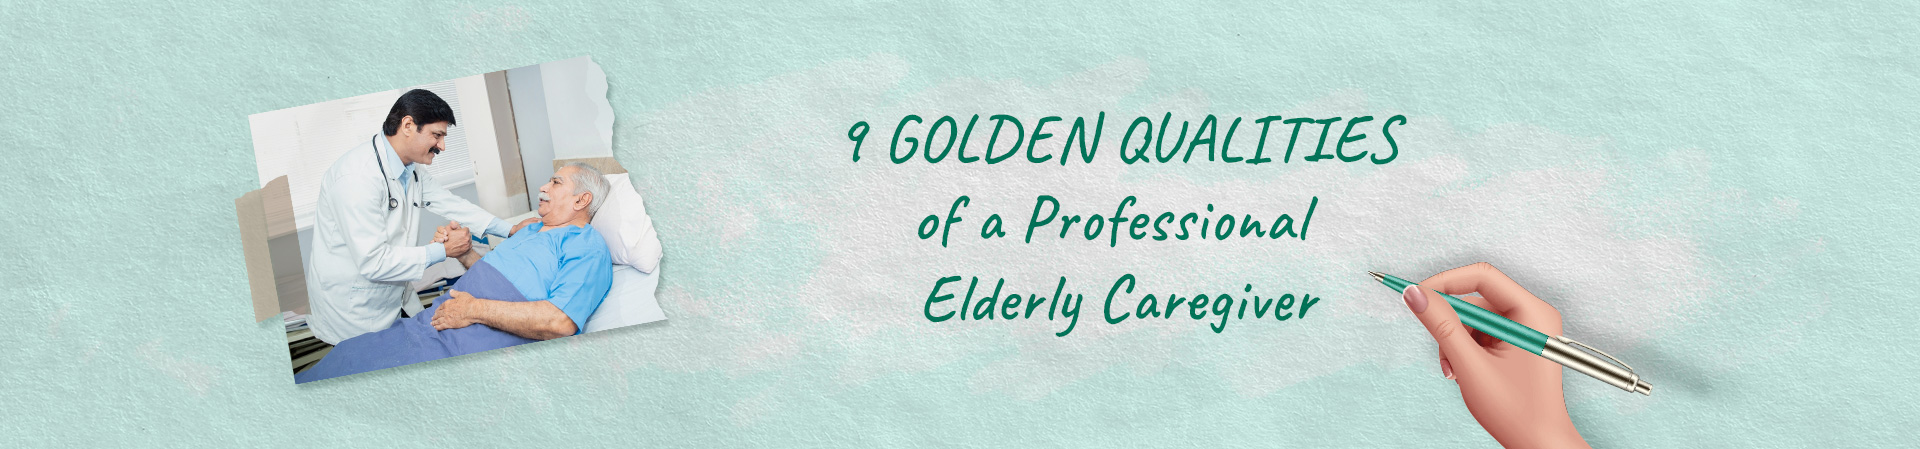 Top 9 Qualities A Professional Caregiver Should Have to Care Your Elderly Parents Lives in Kolkata